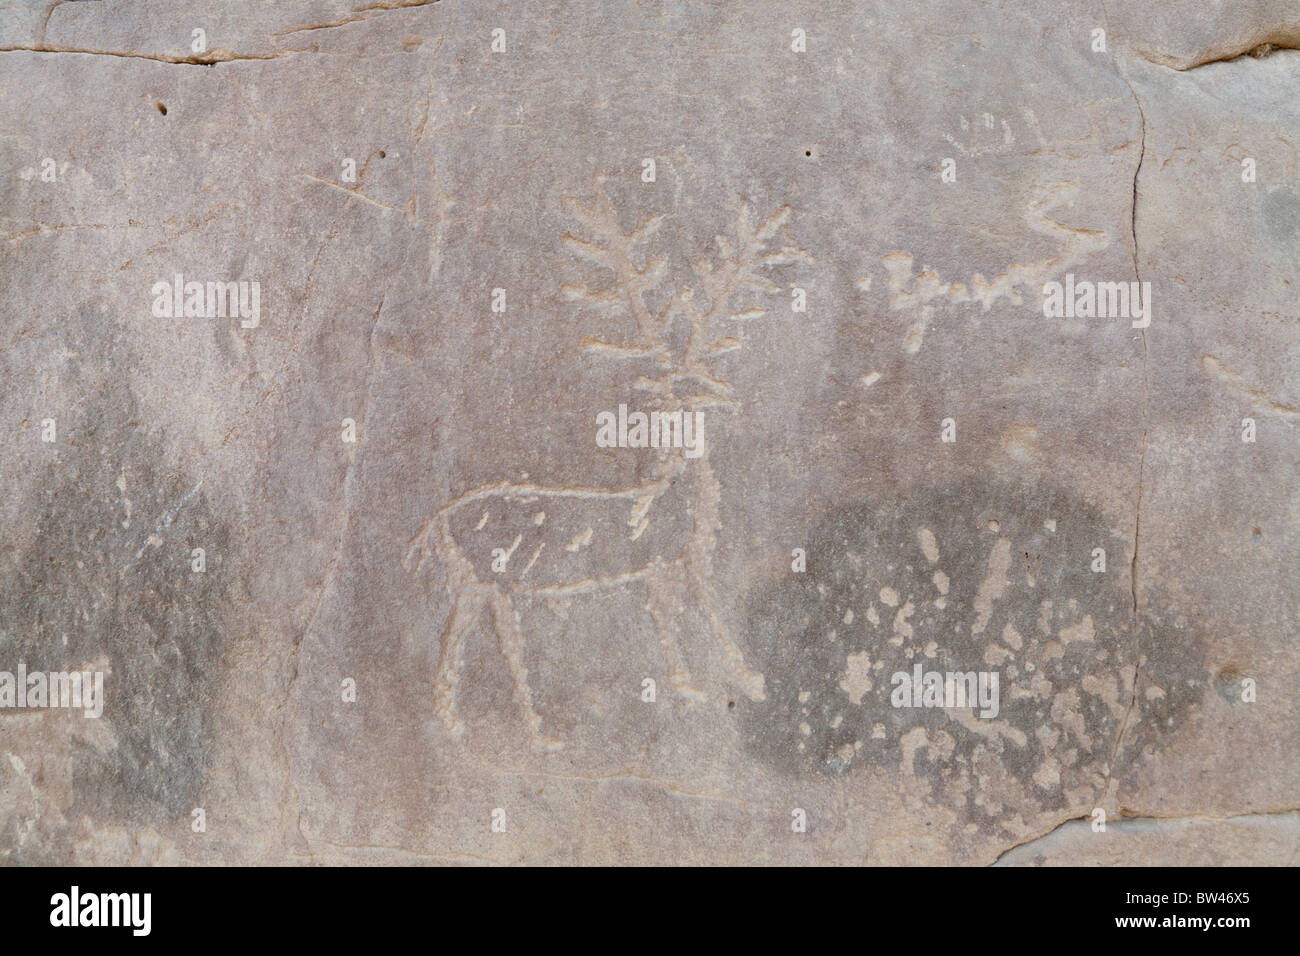 Finely carved ancient rock art showing depiction of horned 'deer'  in the Eastern Desert of Egypt. Stock Photo